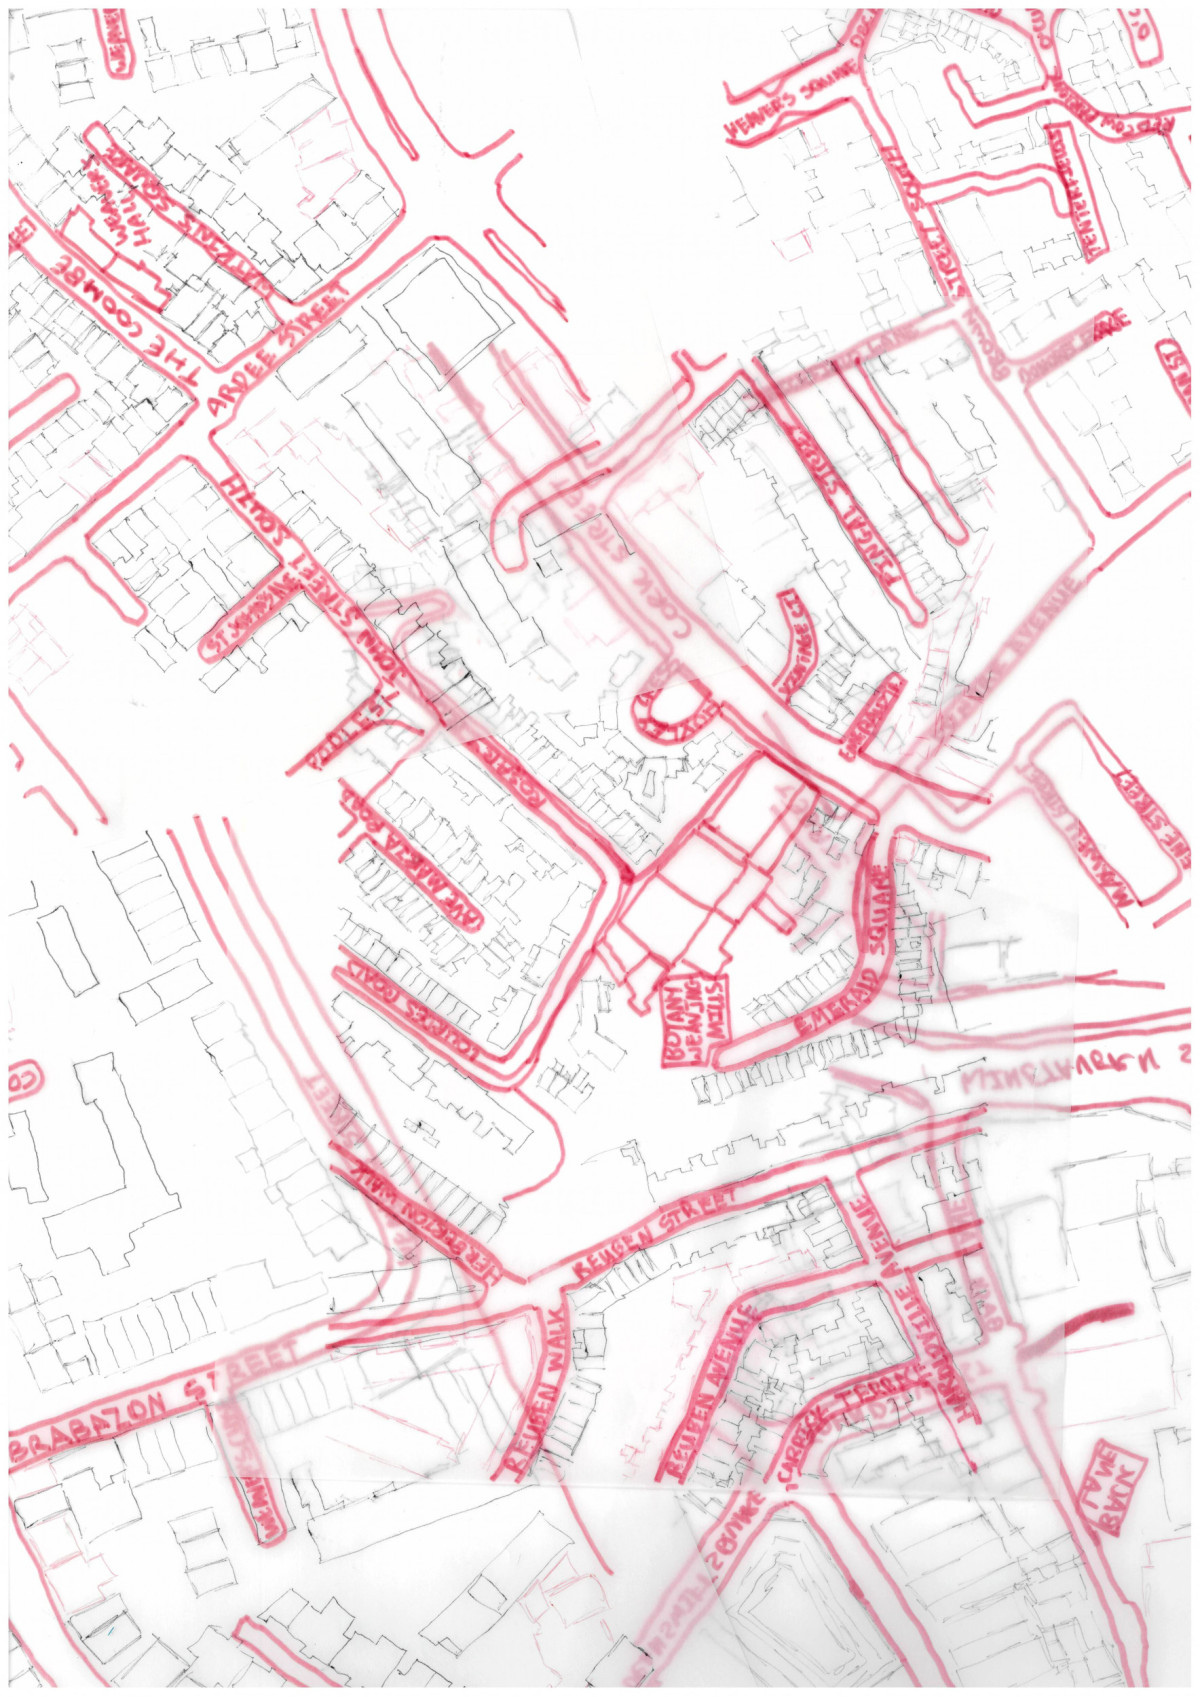 Drawings of maps for each building and place names related to the textile industry in the Liberties